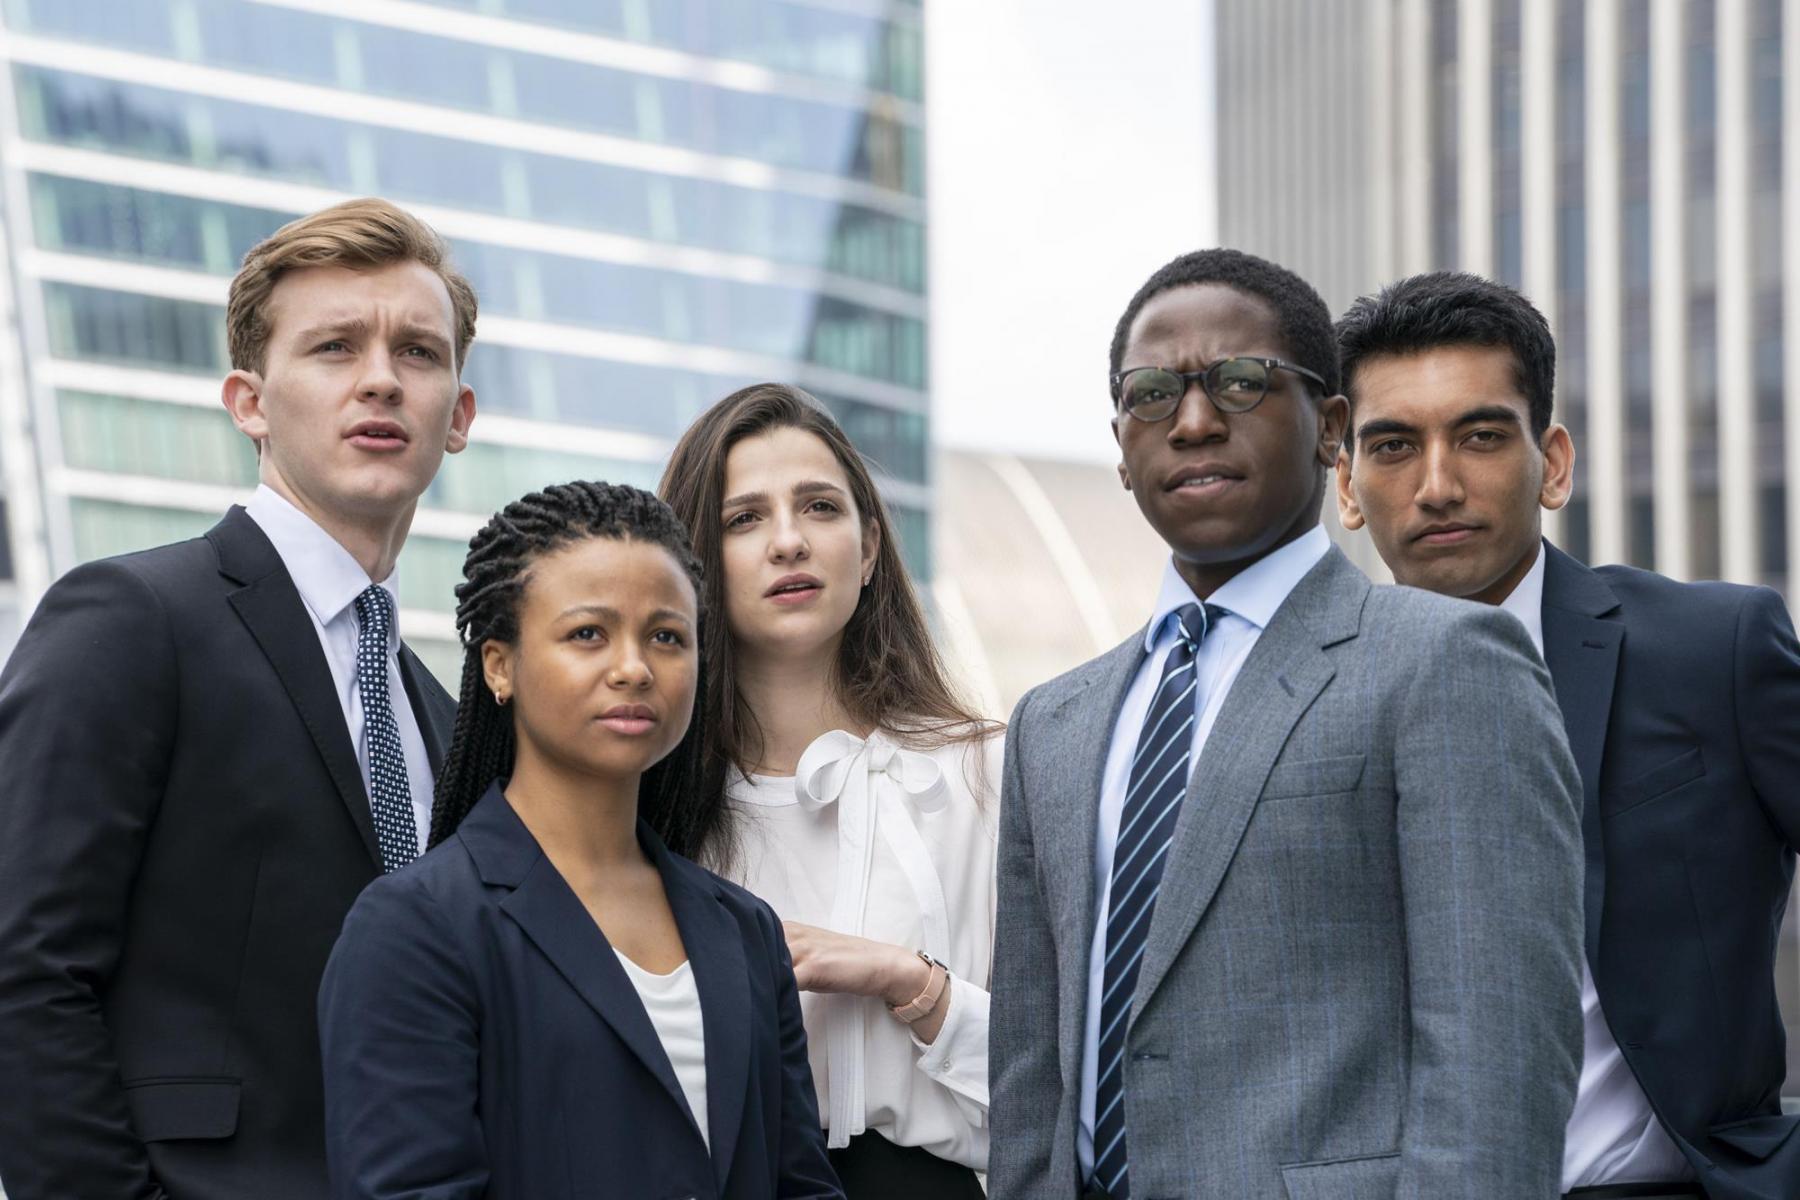 In "Industry" an ambitious group of young people fight to position themselves at the top of the London financial world.  (HBOMax)